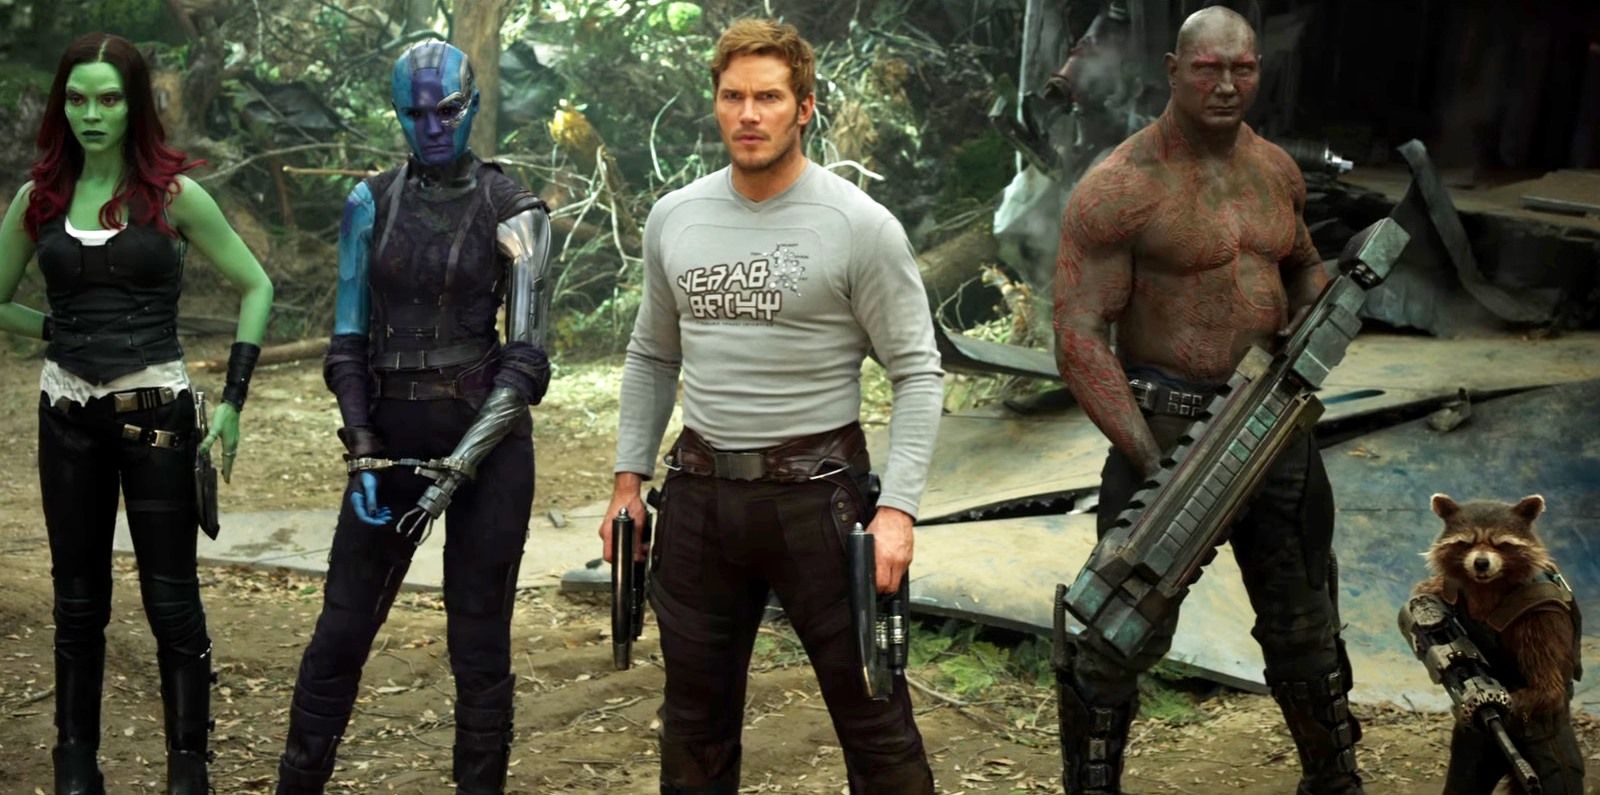 Specifically Year mock Guardians of the Galaxy 2 Trailer #2: Everything We Learned